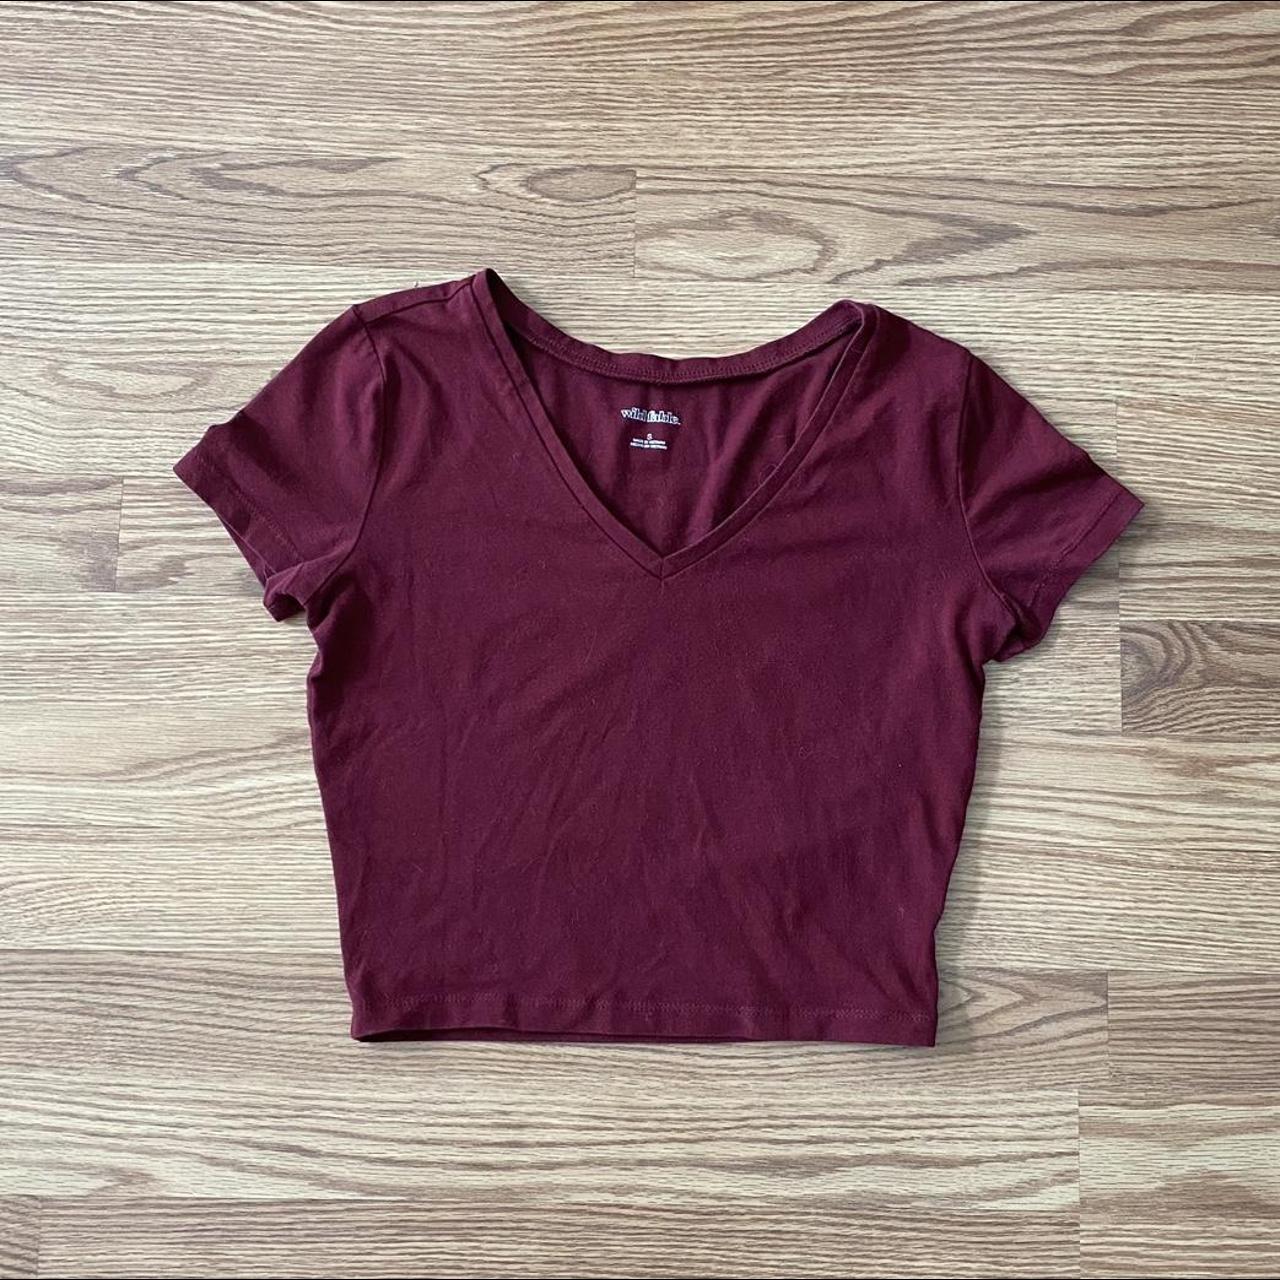 Wild Fable (from Target) crop top with a v-neck size - Depop